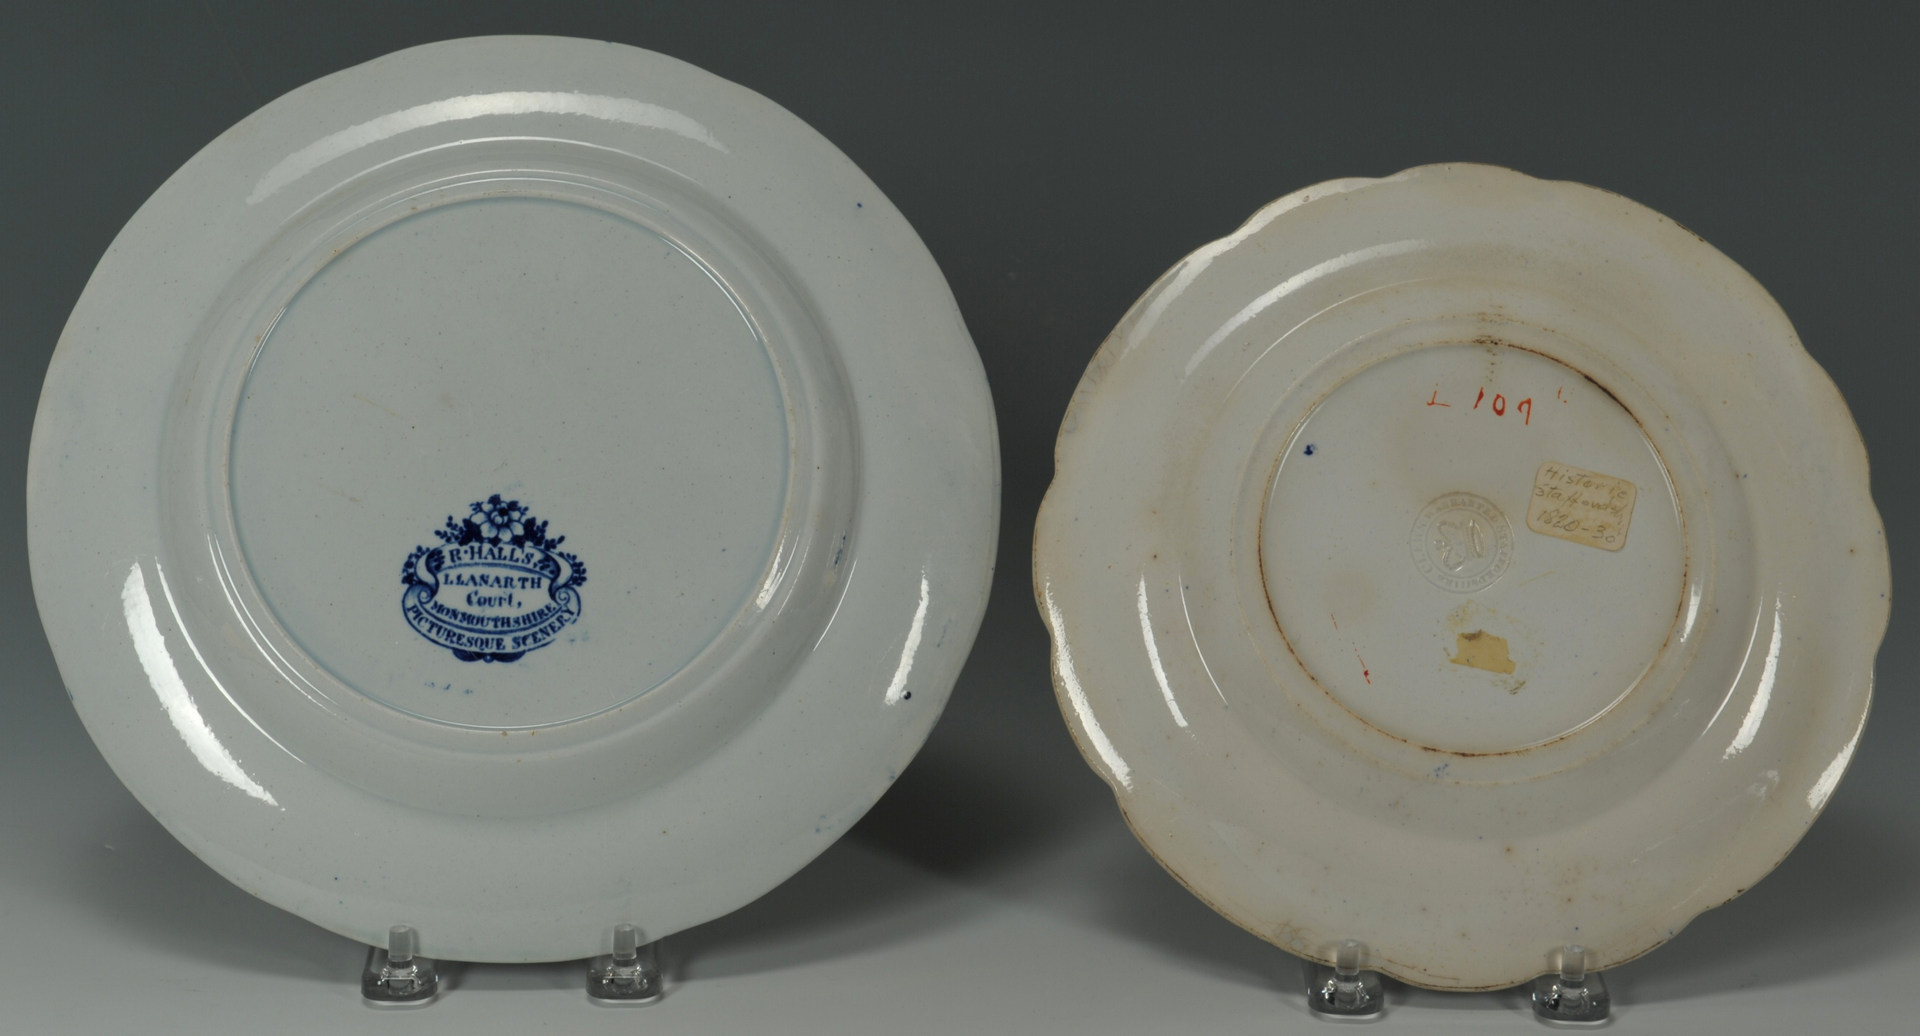 Lot 252: Group of Historic Staffordshire Plates